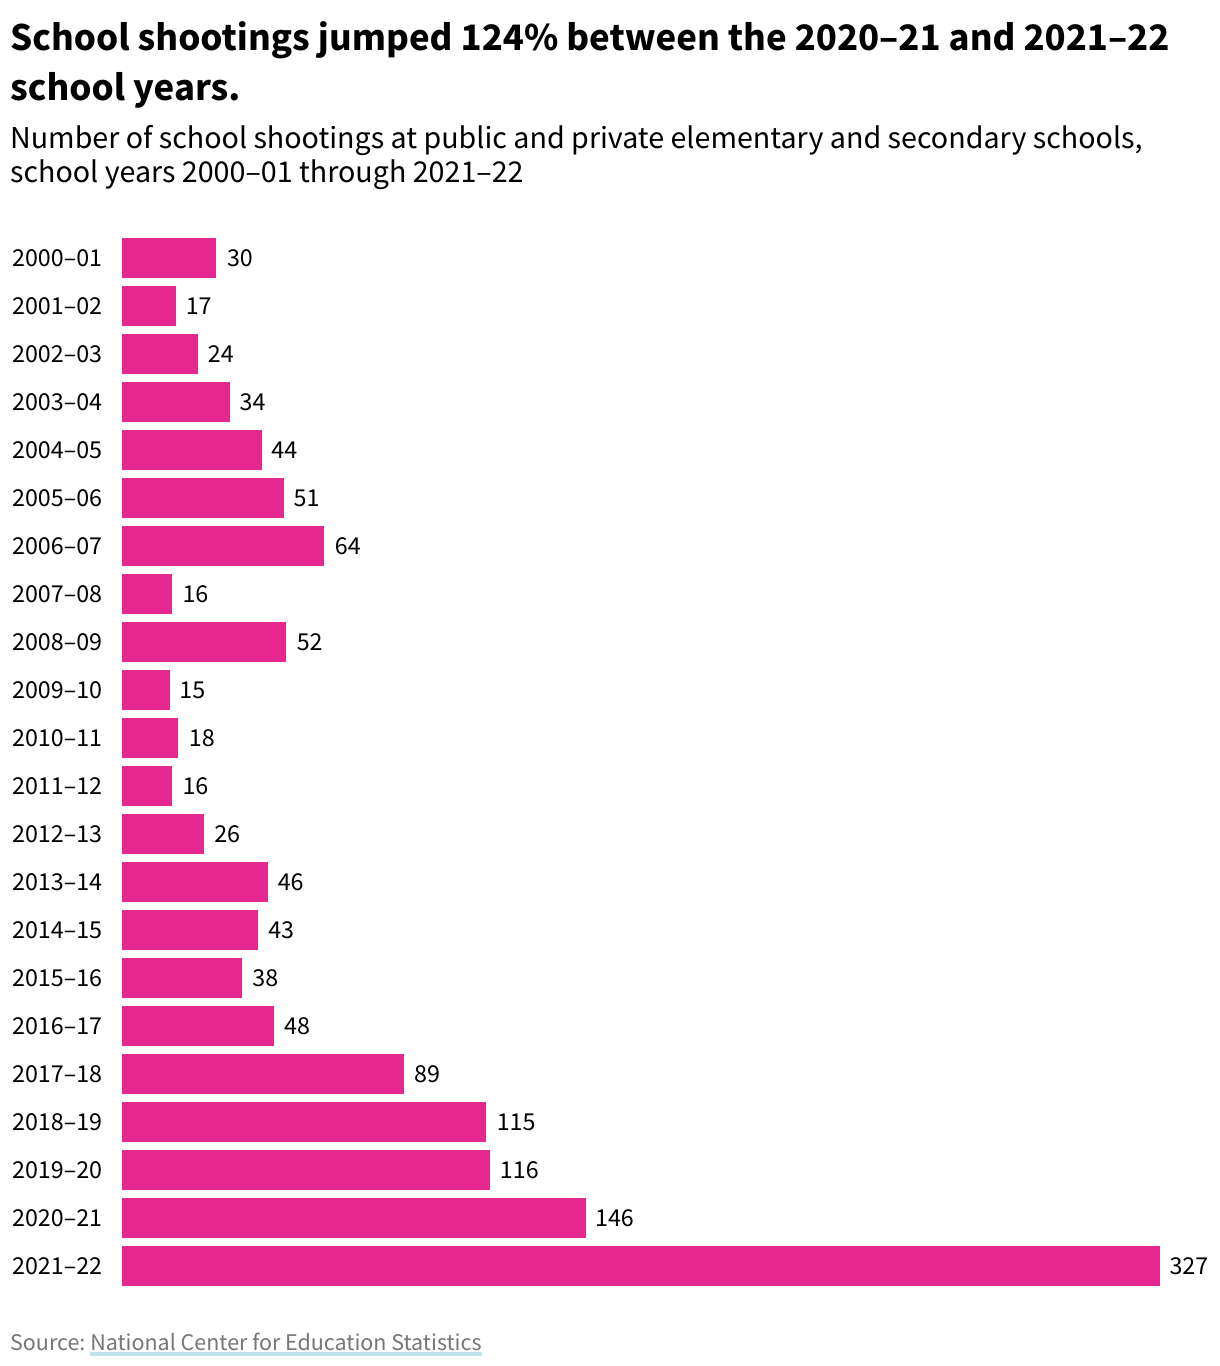 A column chart depicting the rise in school shootings at public and private elementary and secondary schools between the 2000–01 and 2021–22 school years.